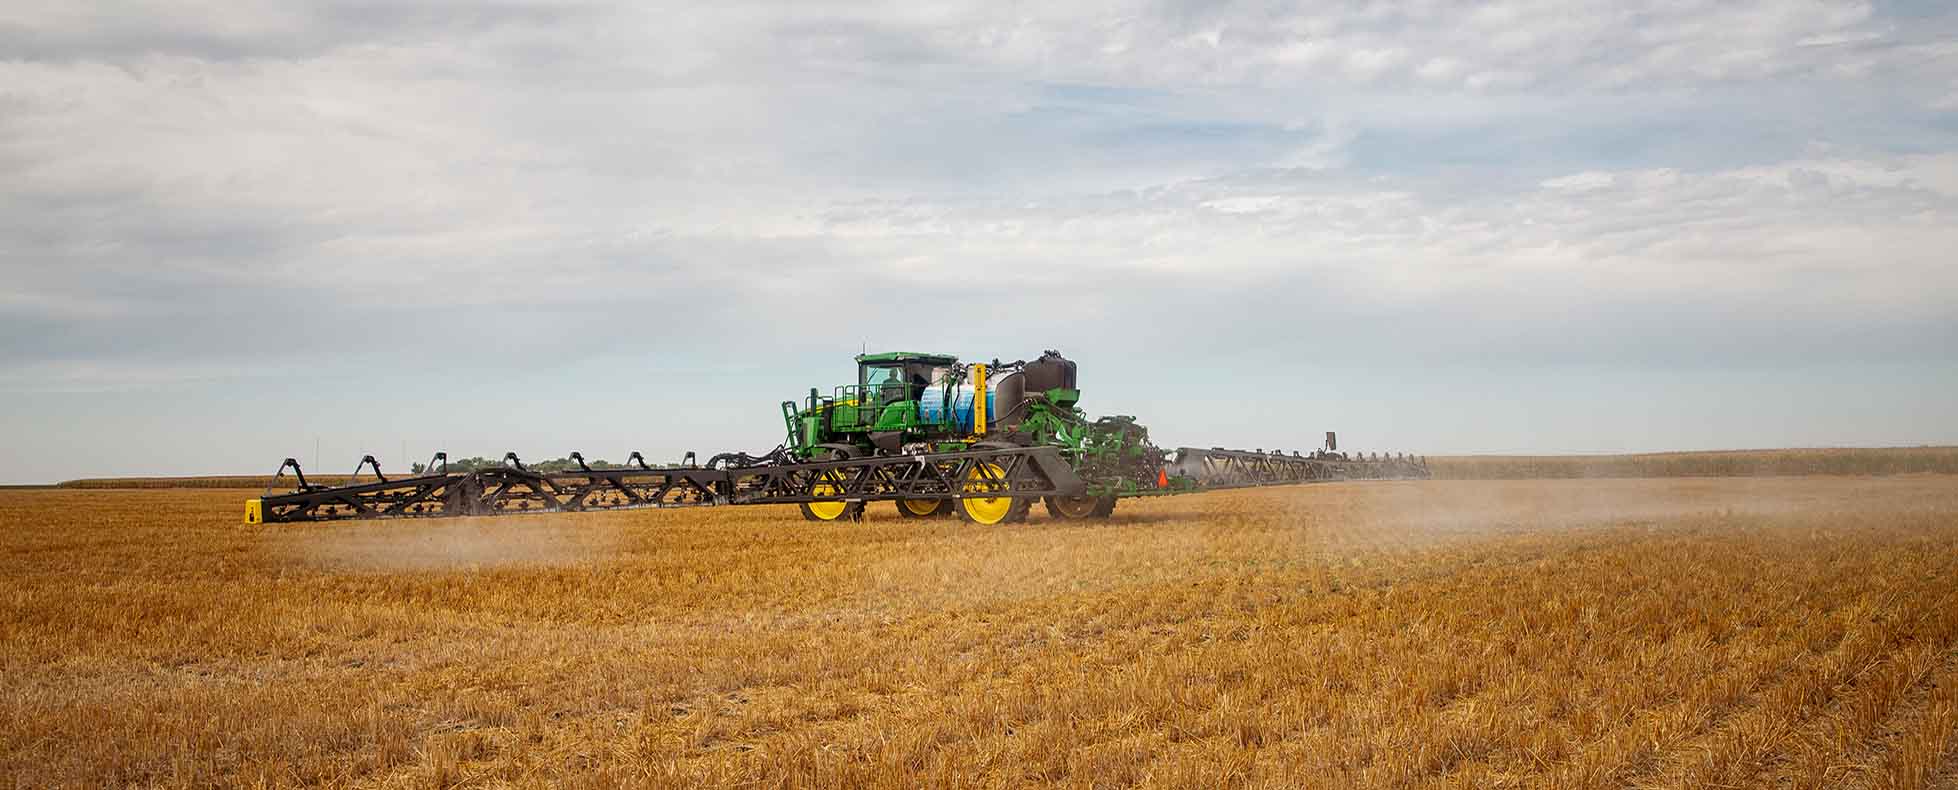 Five Factors to Find the Right Time to Invest in Ag Technology